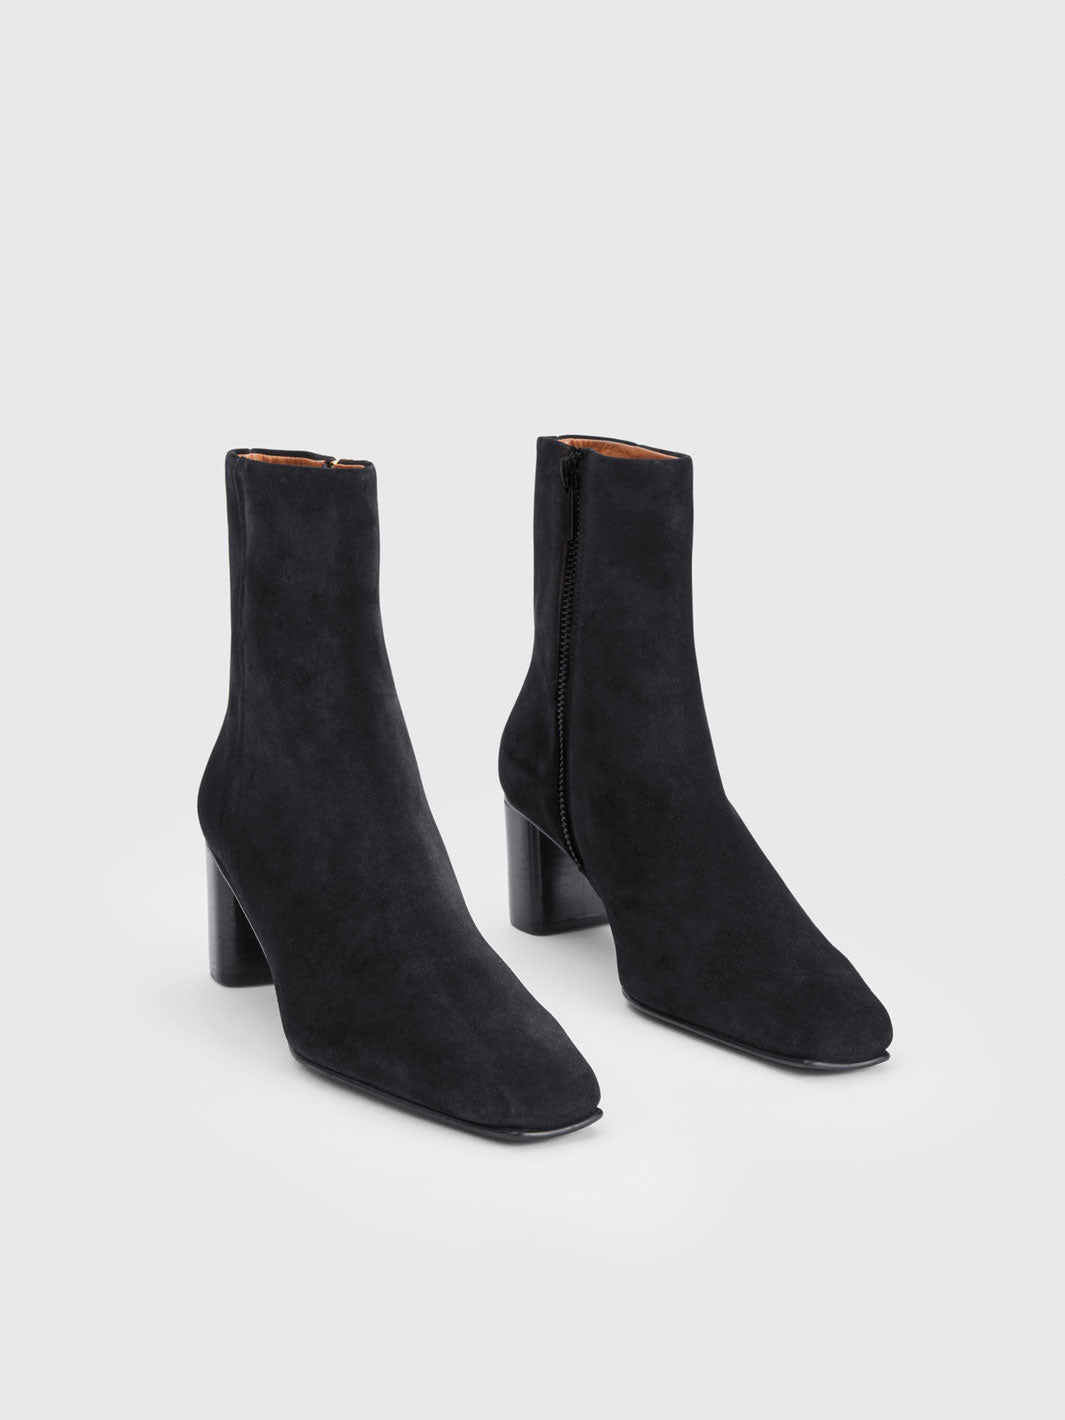 Praia Black Suede Ankle boots